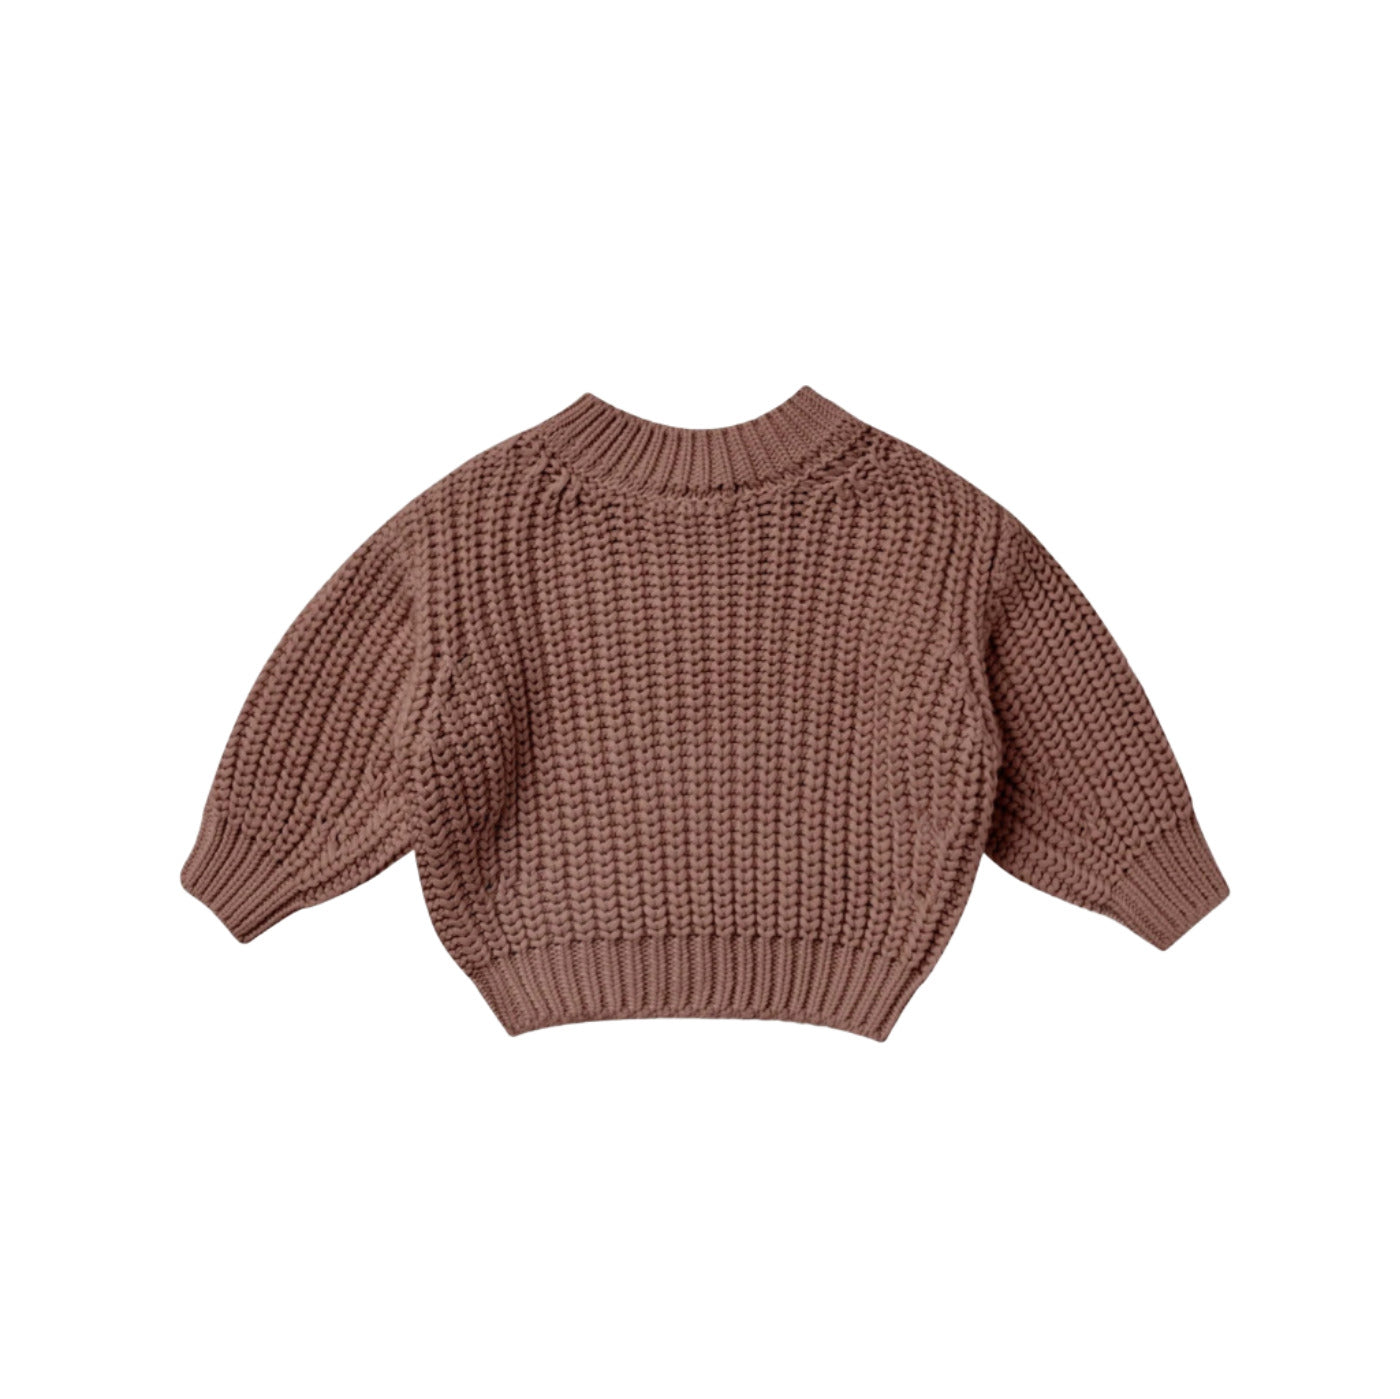 QUINCY MAE Chunky Knit Sweater Pecan ALWAYS SHOW